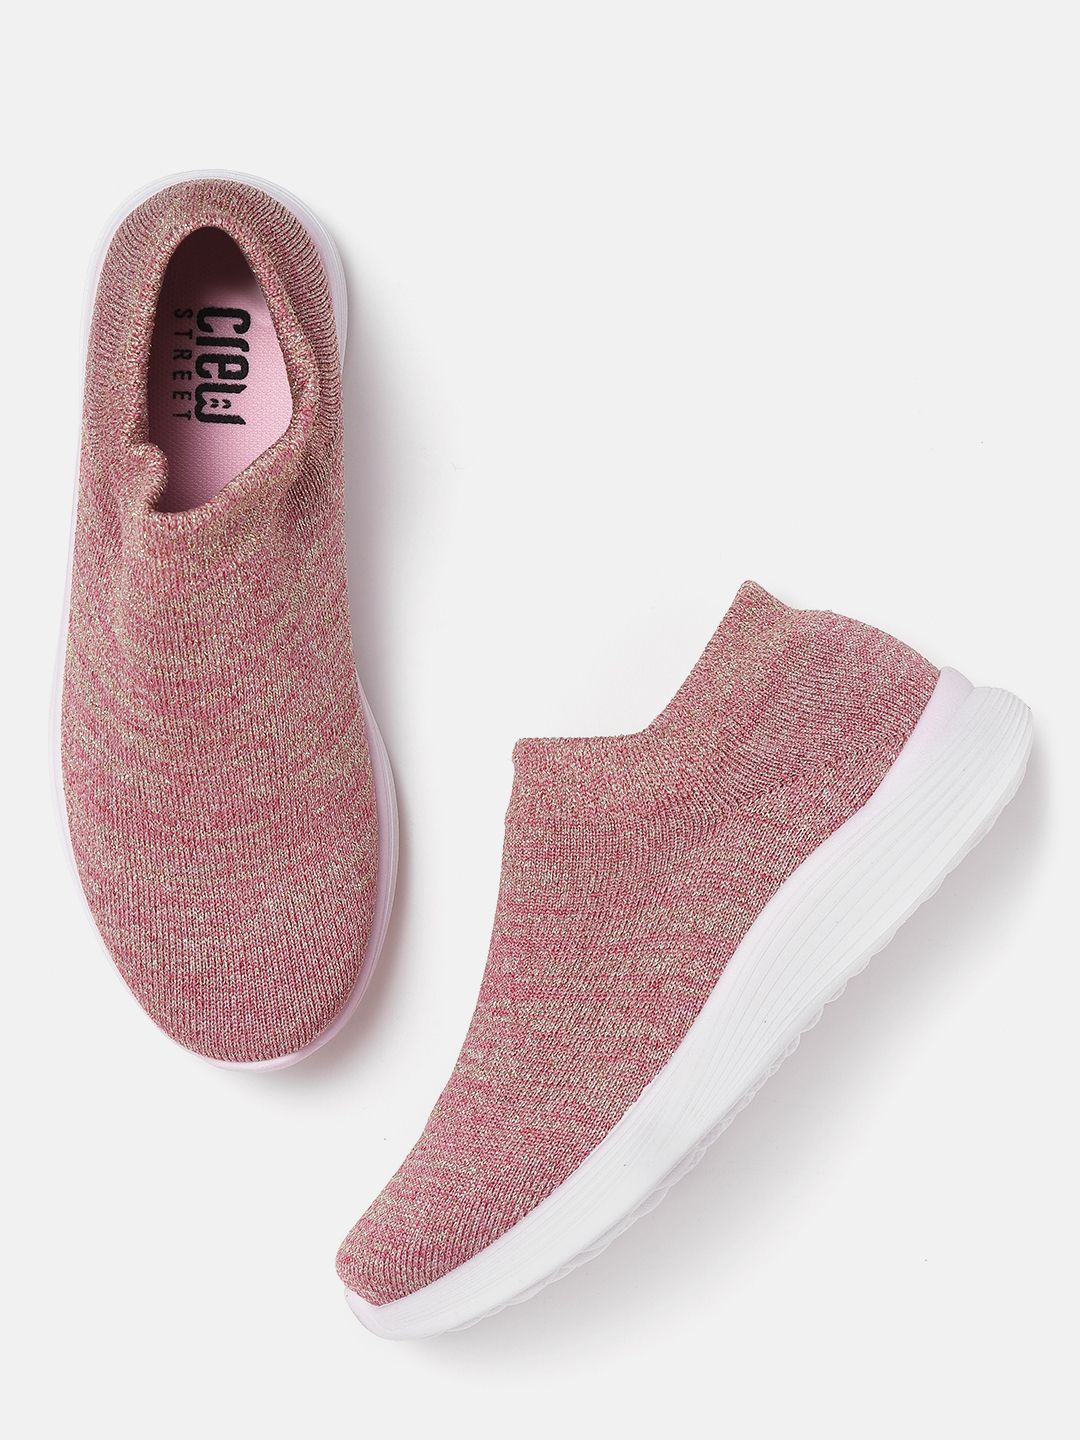 Crew STREET Women Pink & Gold-Toned Slip-On Sneakers Price in India